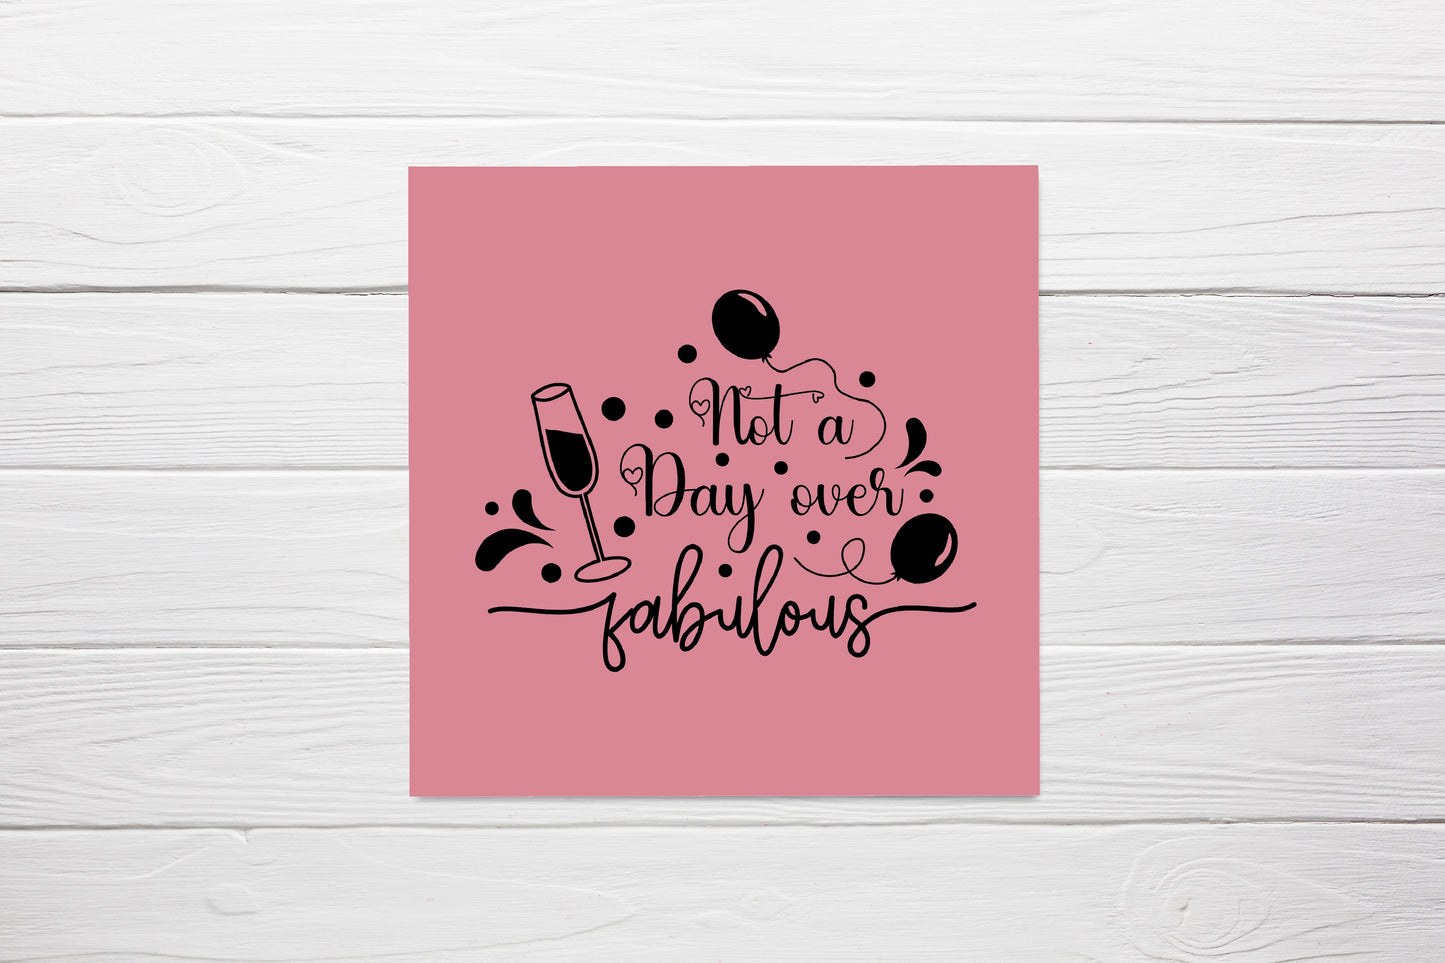 Birthday Card | Not A Day Over Fabulous | Girly Card